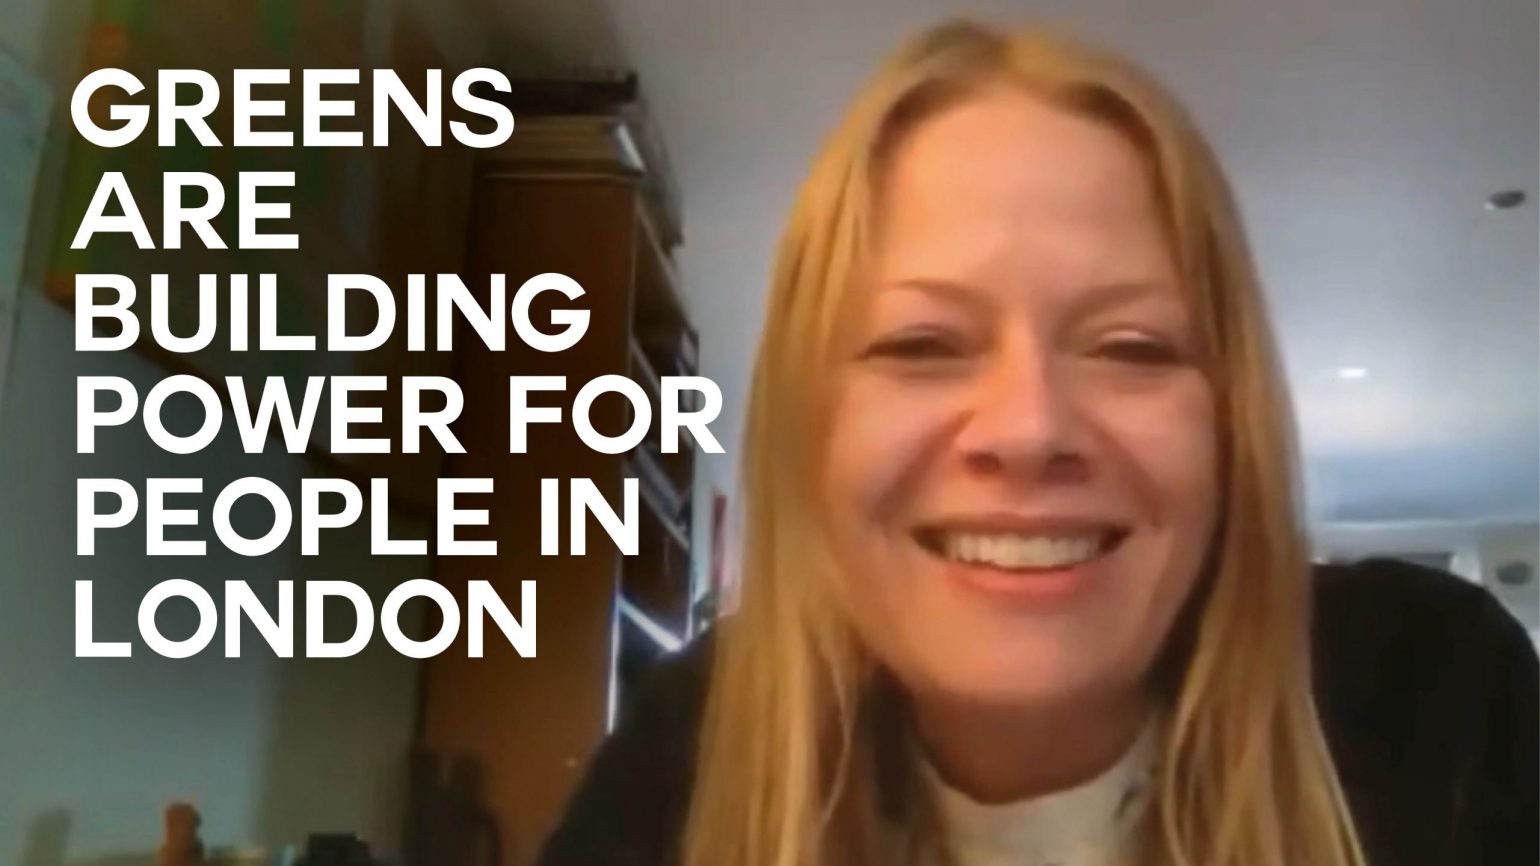 A still from an interview with Green Party London Assembly member Sian Berry with text overlaid reading "Greens are building power for people in London"